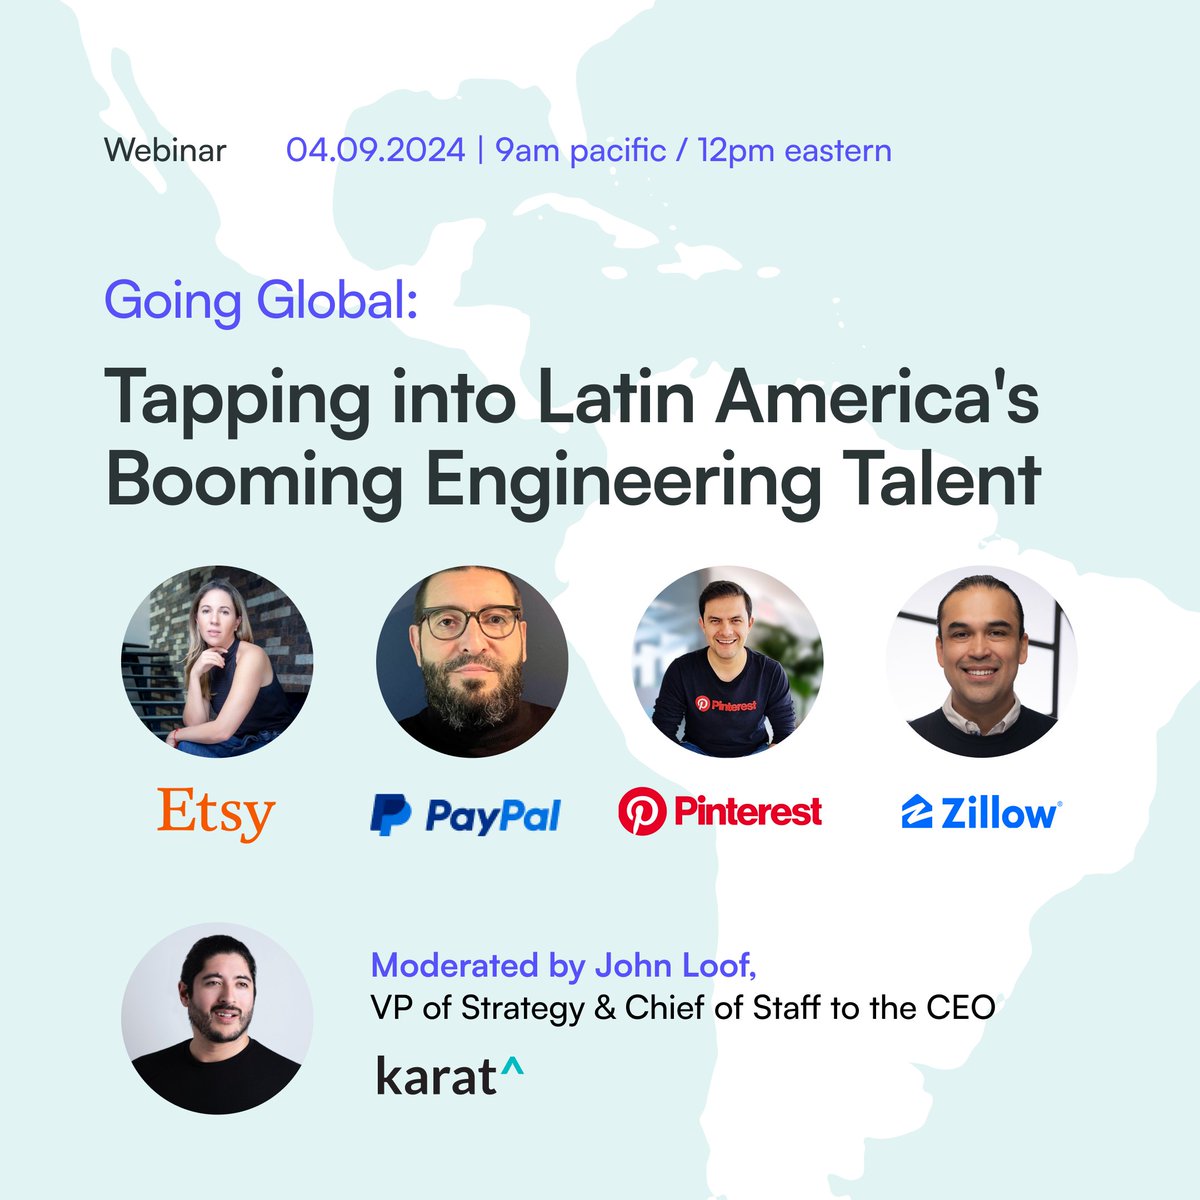 Want to ask the talent leaders from @Etsy, @PayPal, @Pinterest, or @zillow about hiring #SoftwareEngineers in Latin America? Now’s your chance! Don’t forget to register for the webinar on April 9: bit.ly/3TDpuFp